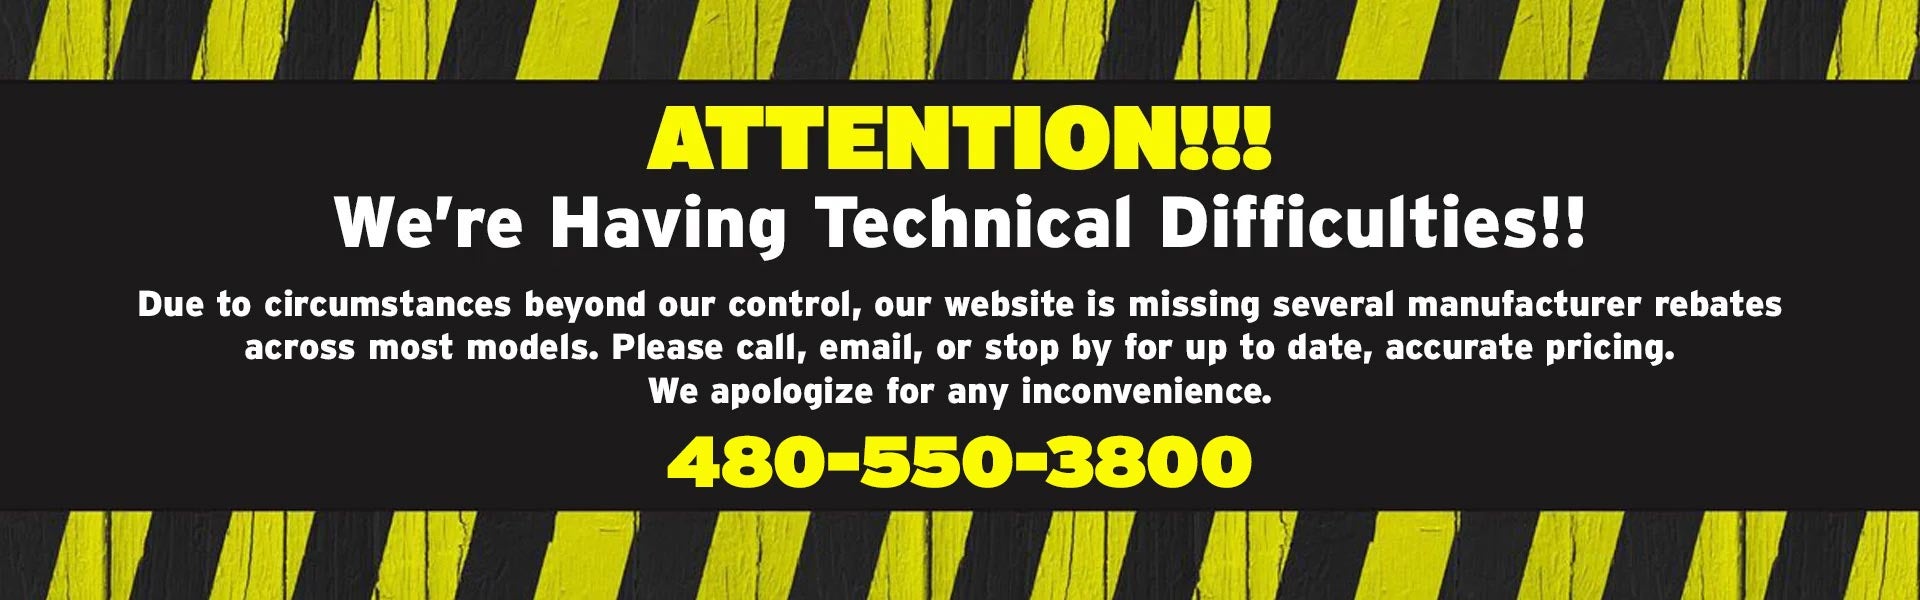 Technical Difficulties! 